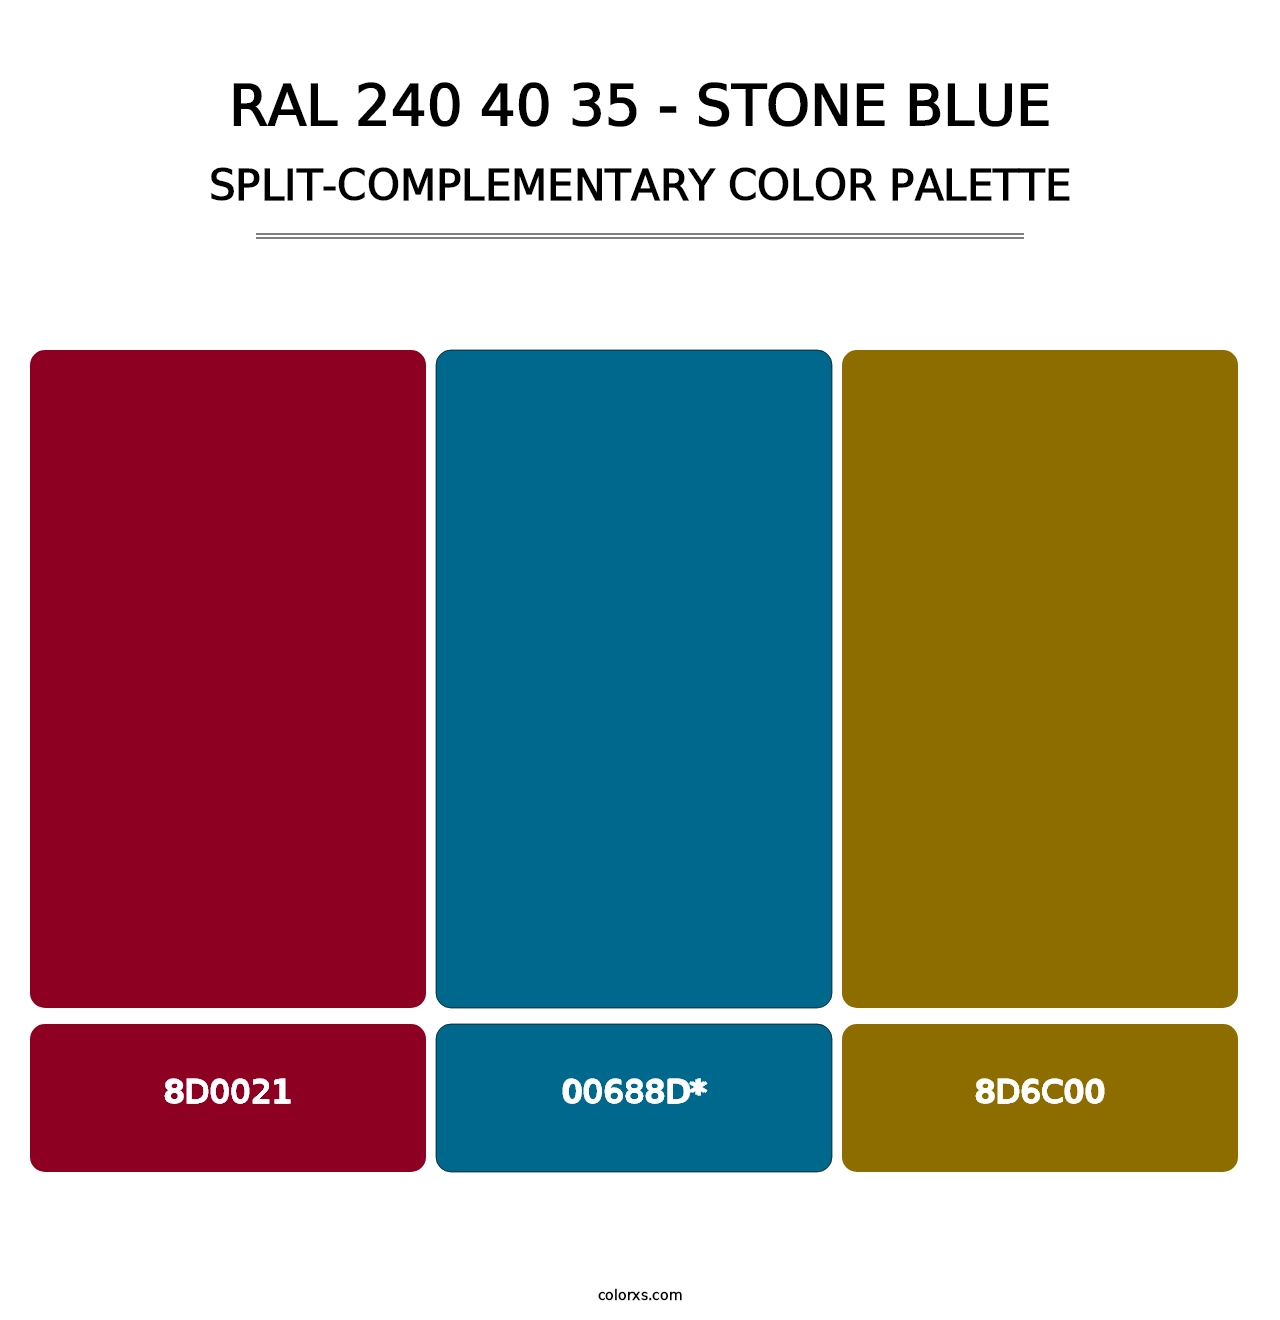 RAL 240 40 35 - Stone Blue - Split-Complementary Color Palette